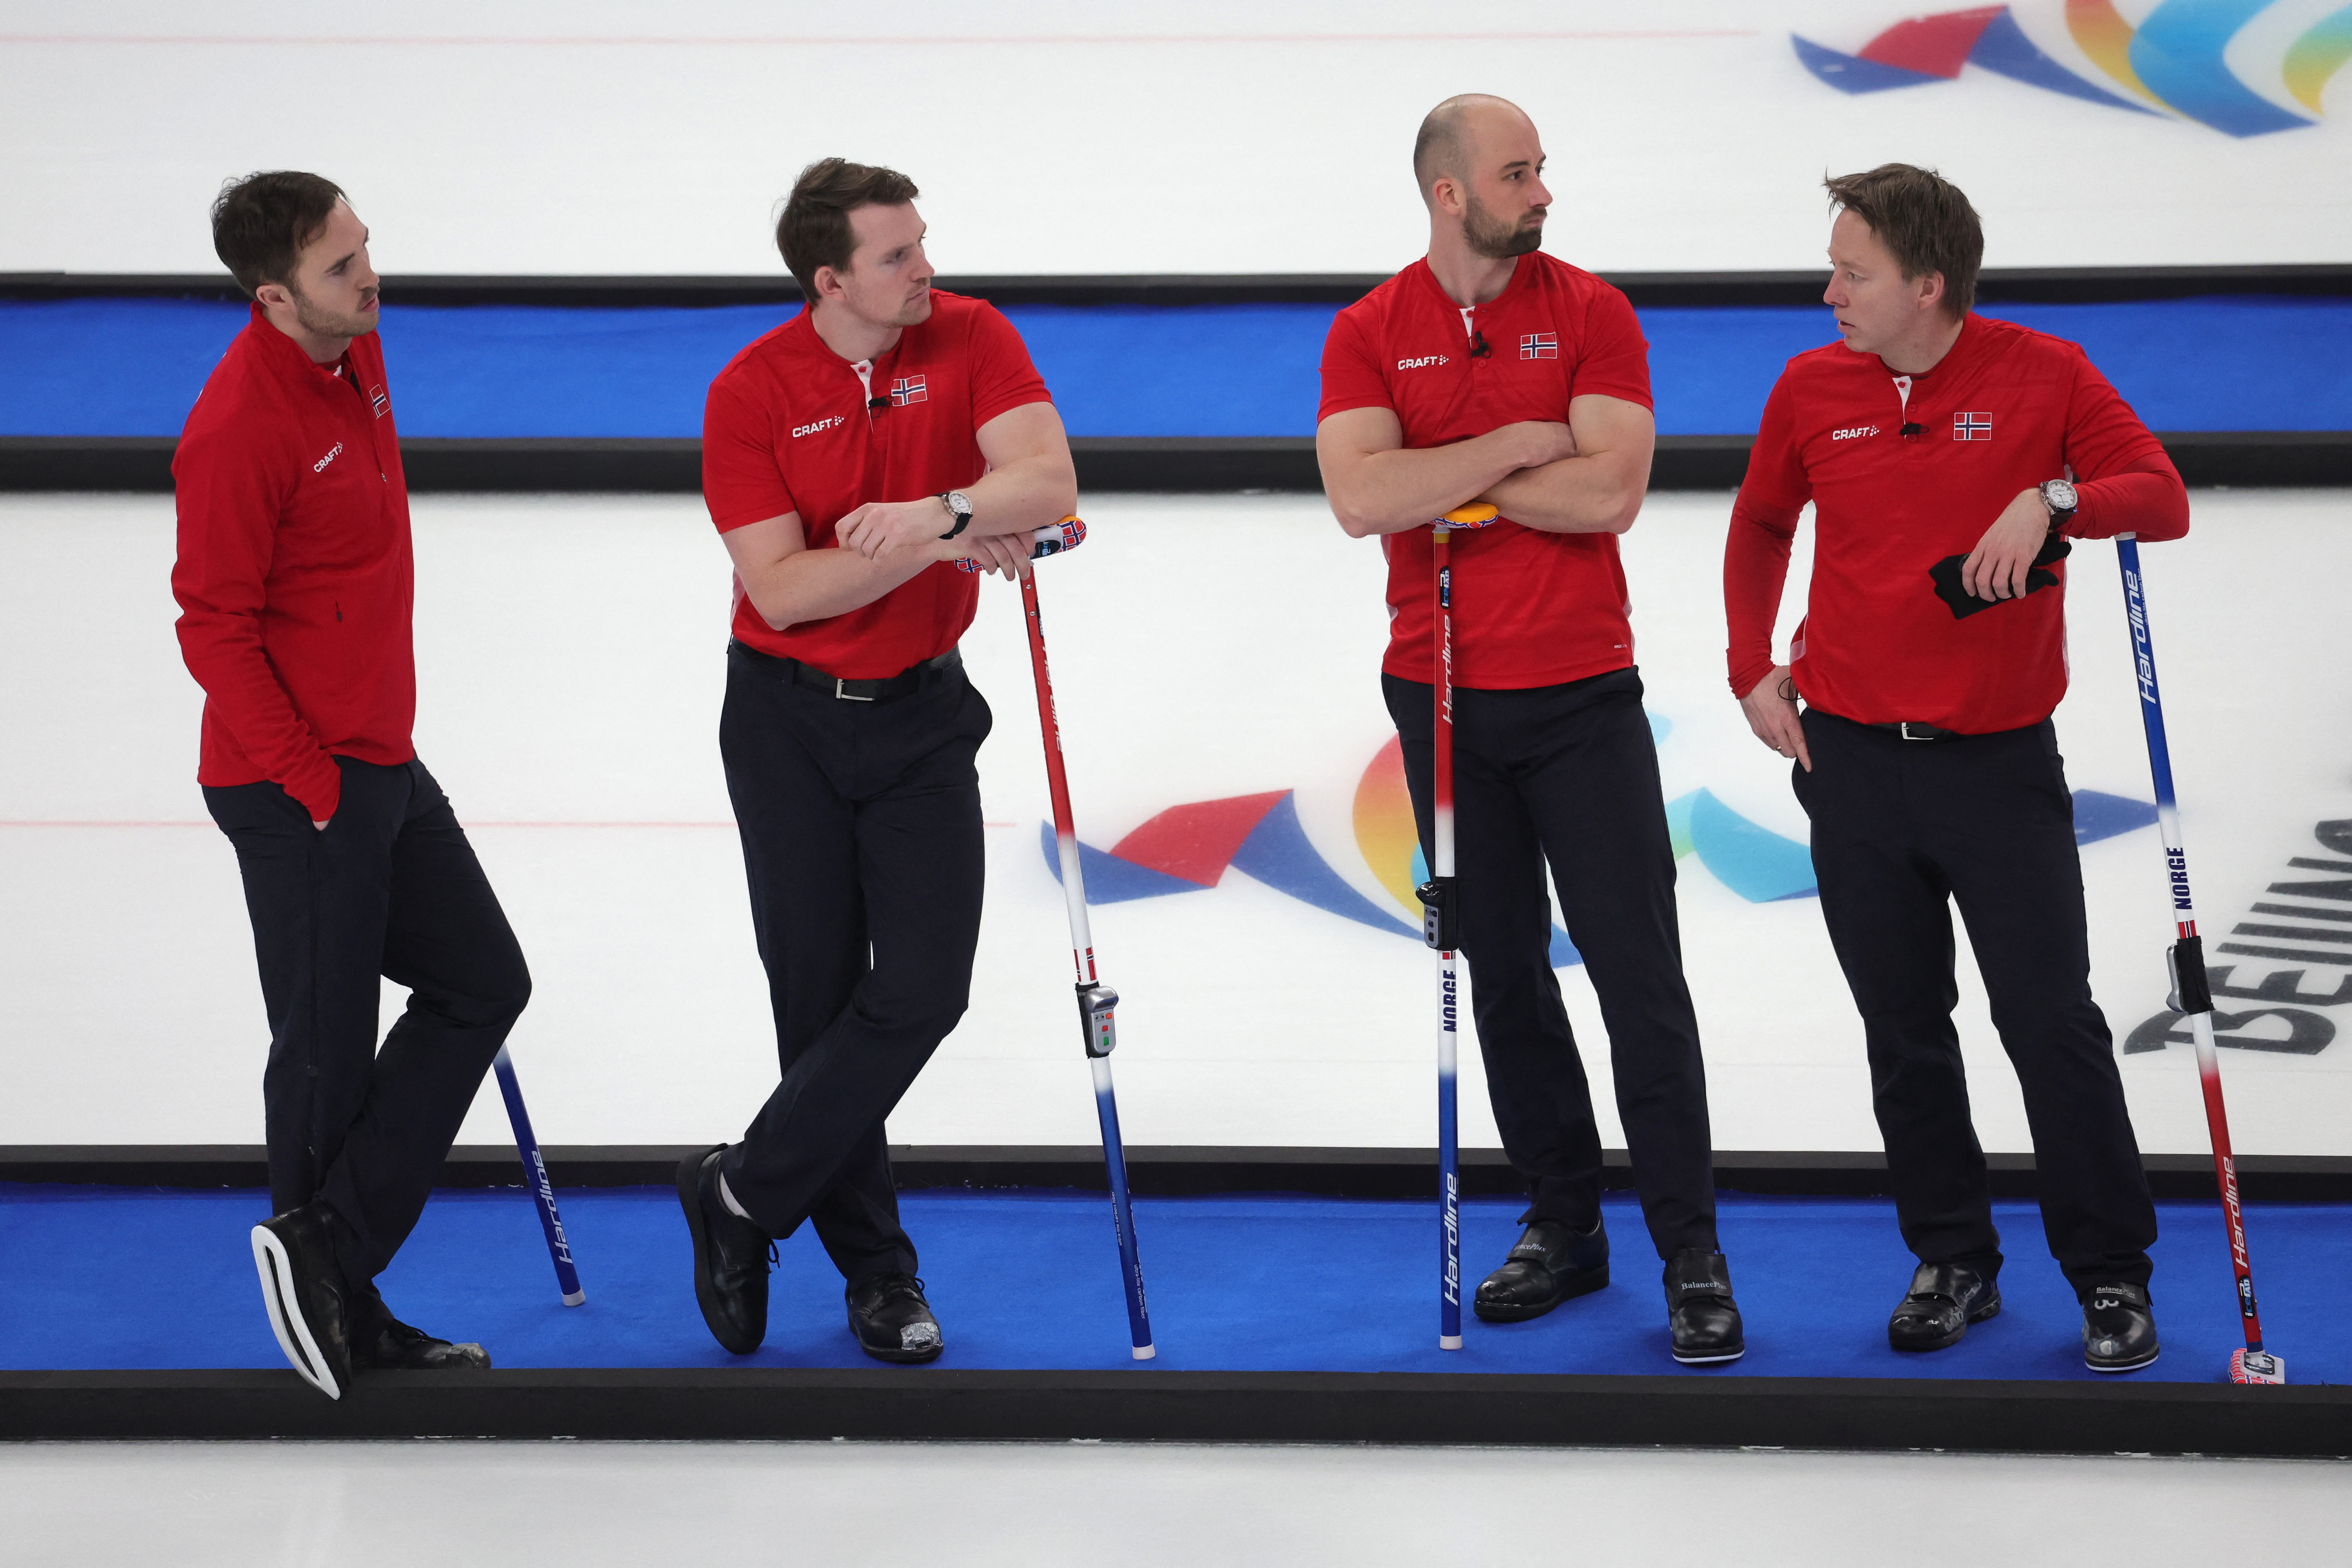 Norwegian pants go off as curling piques Chinese curiosity